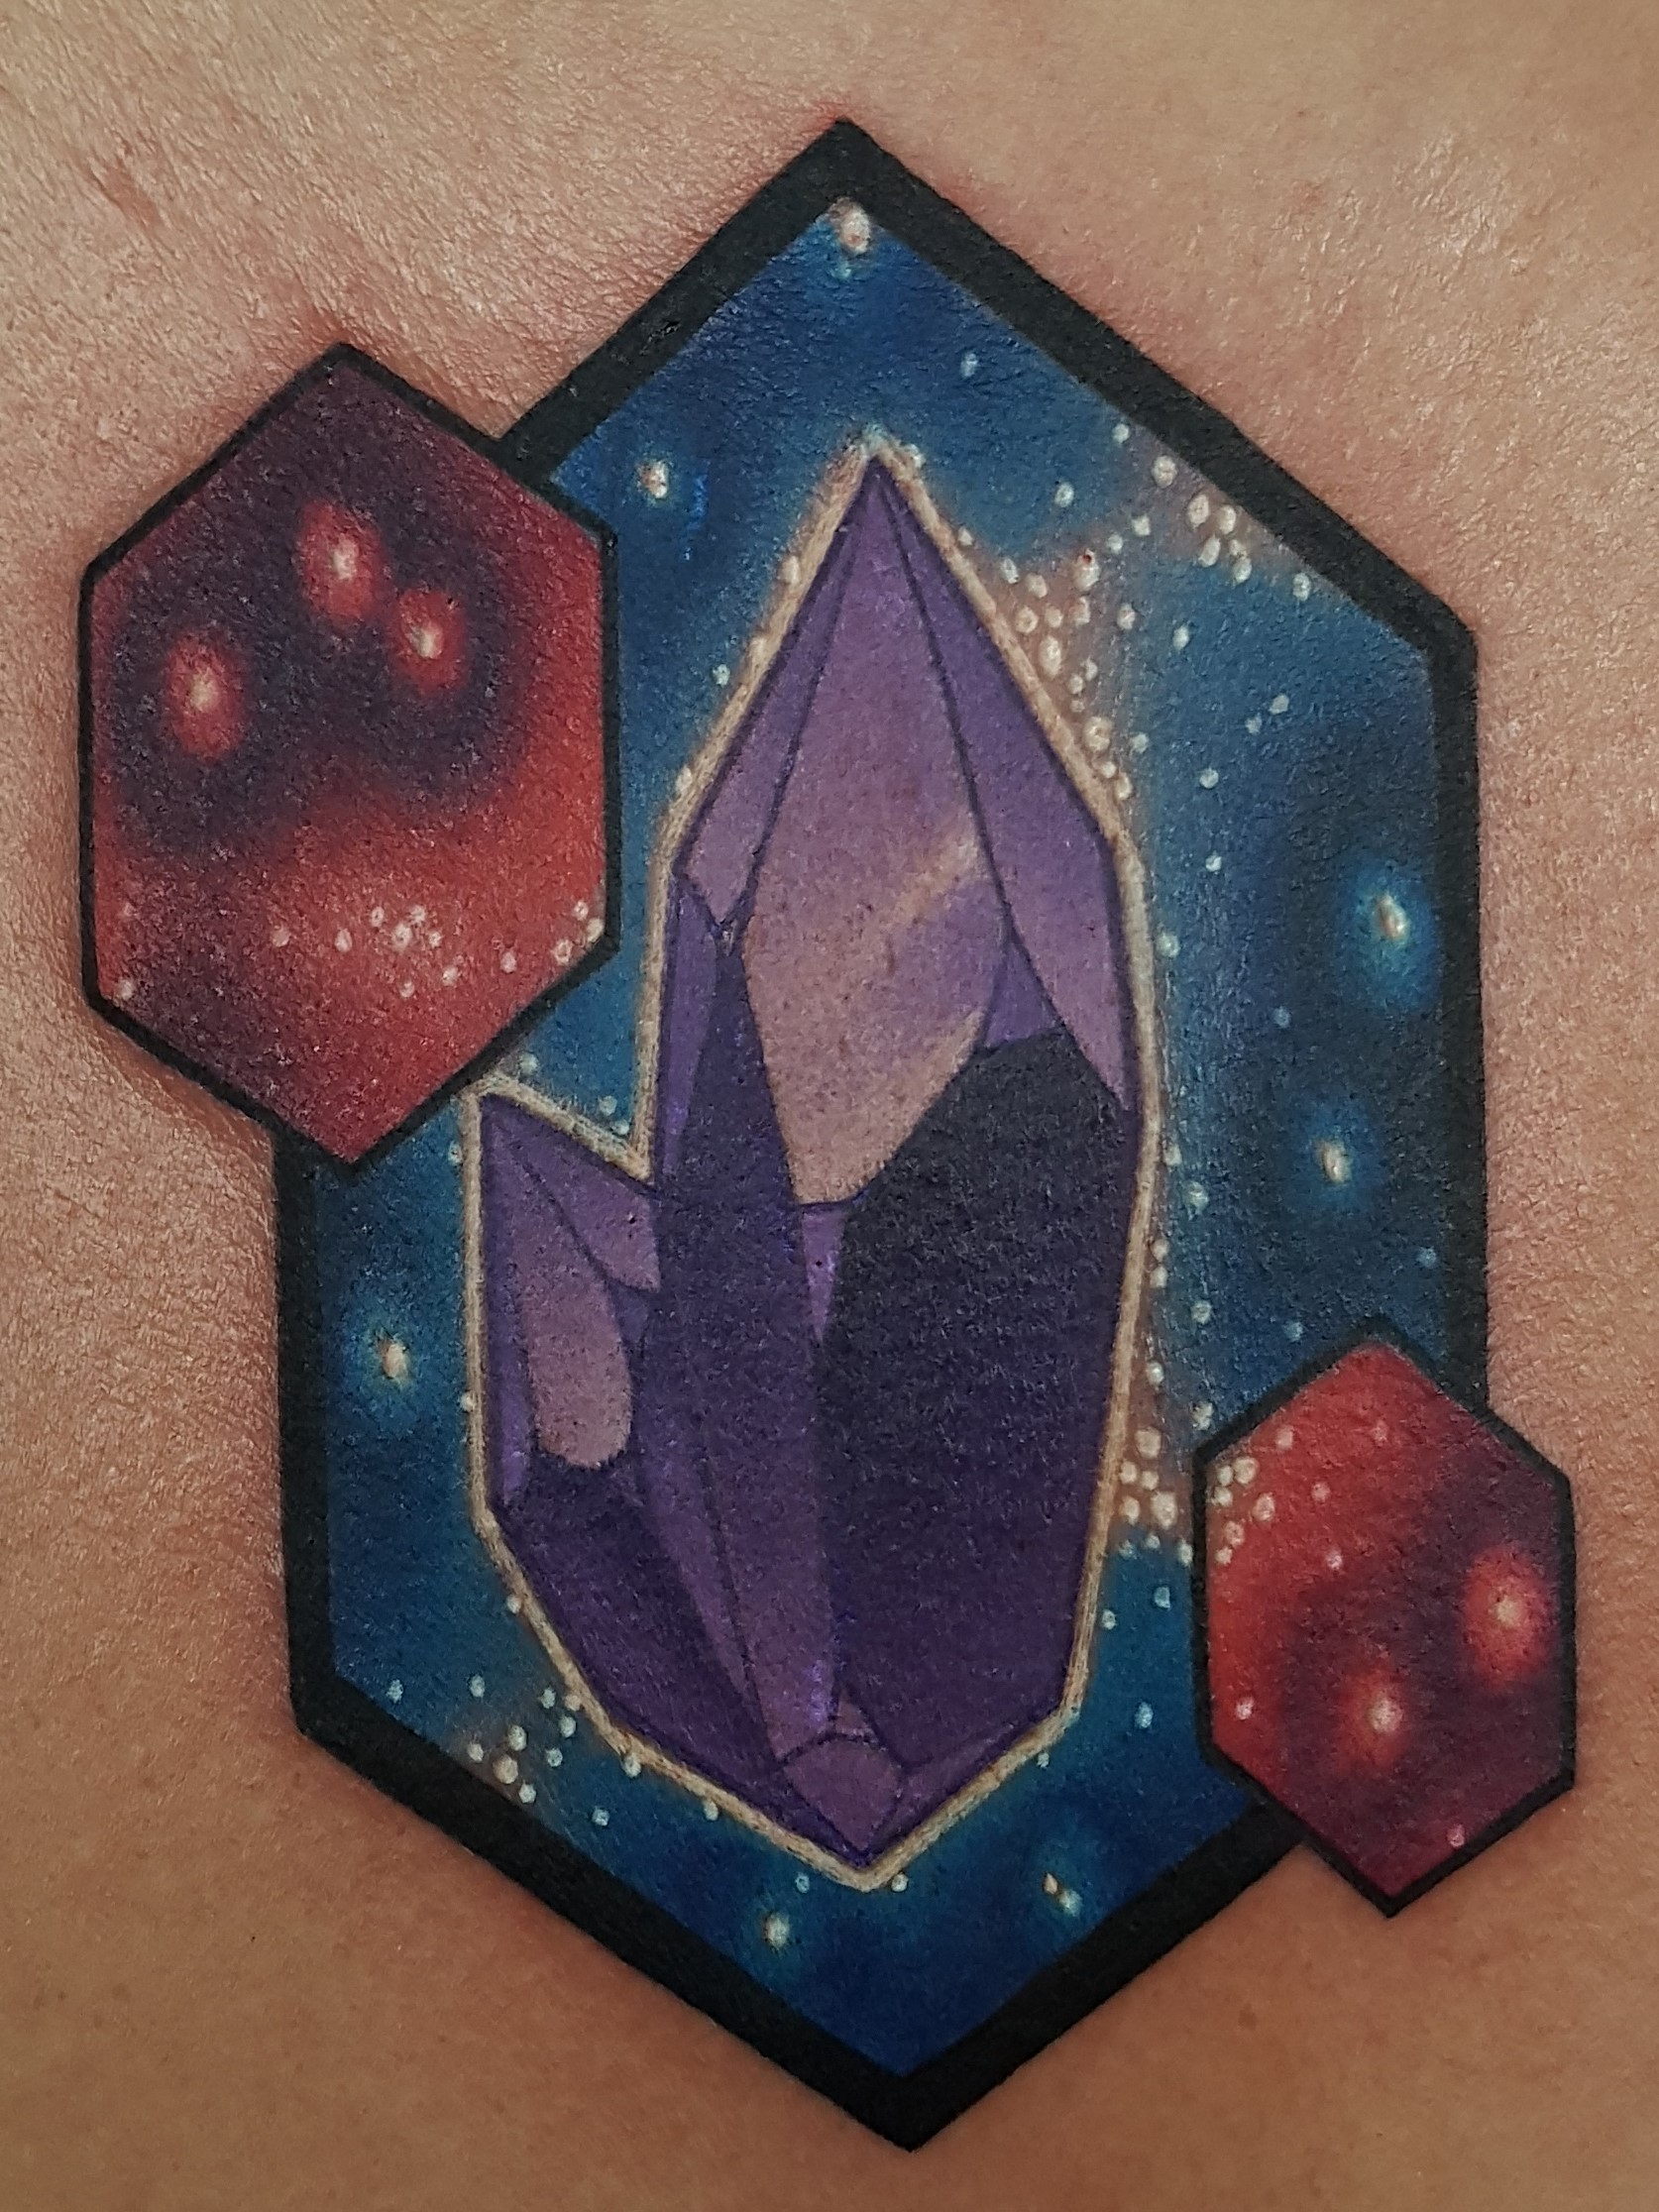 Tattoo of Crystals done by Cracker Joe Swider in CT